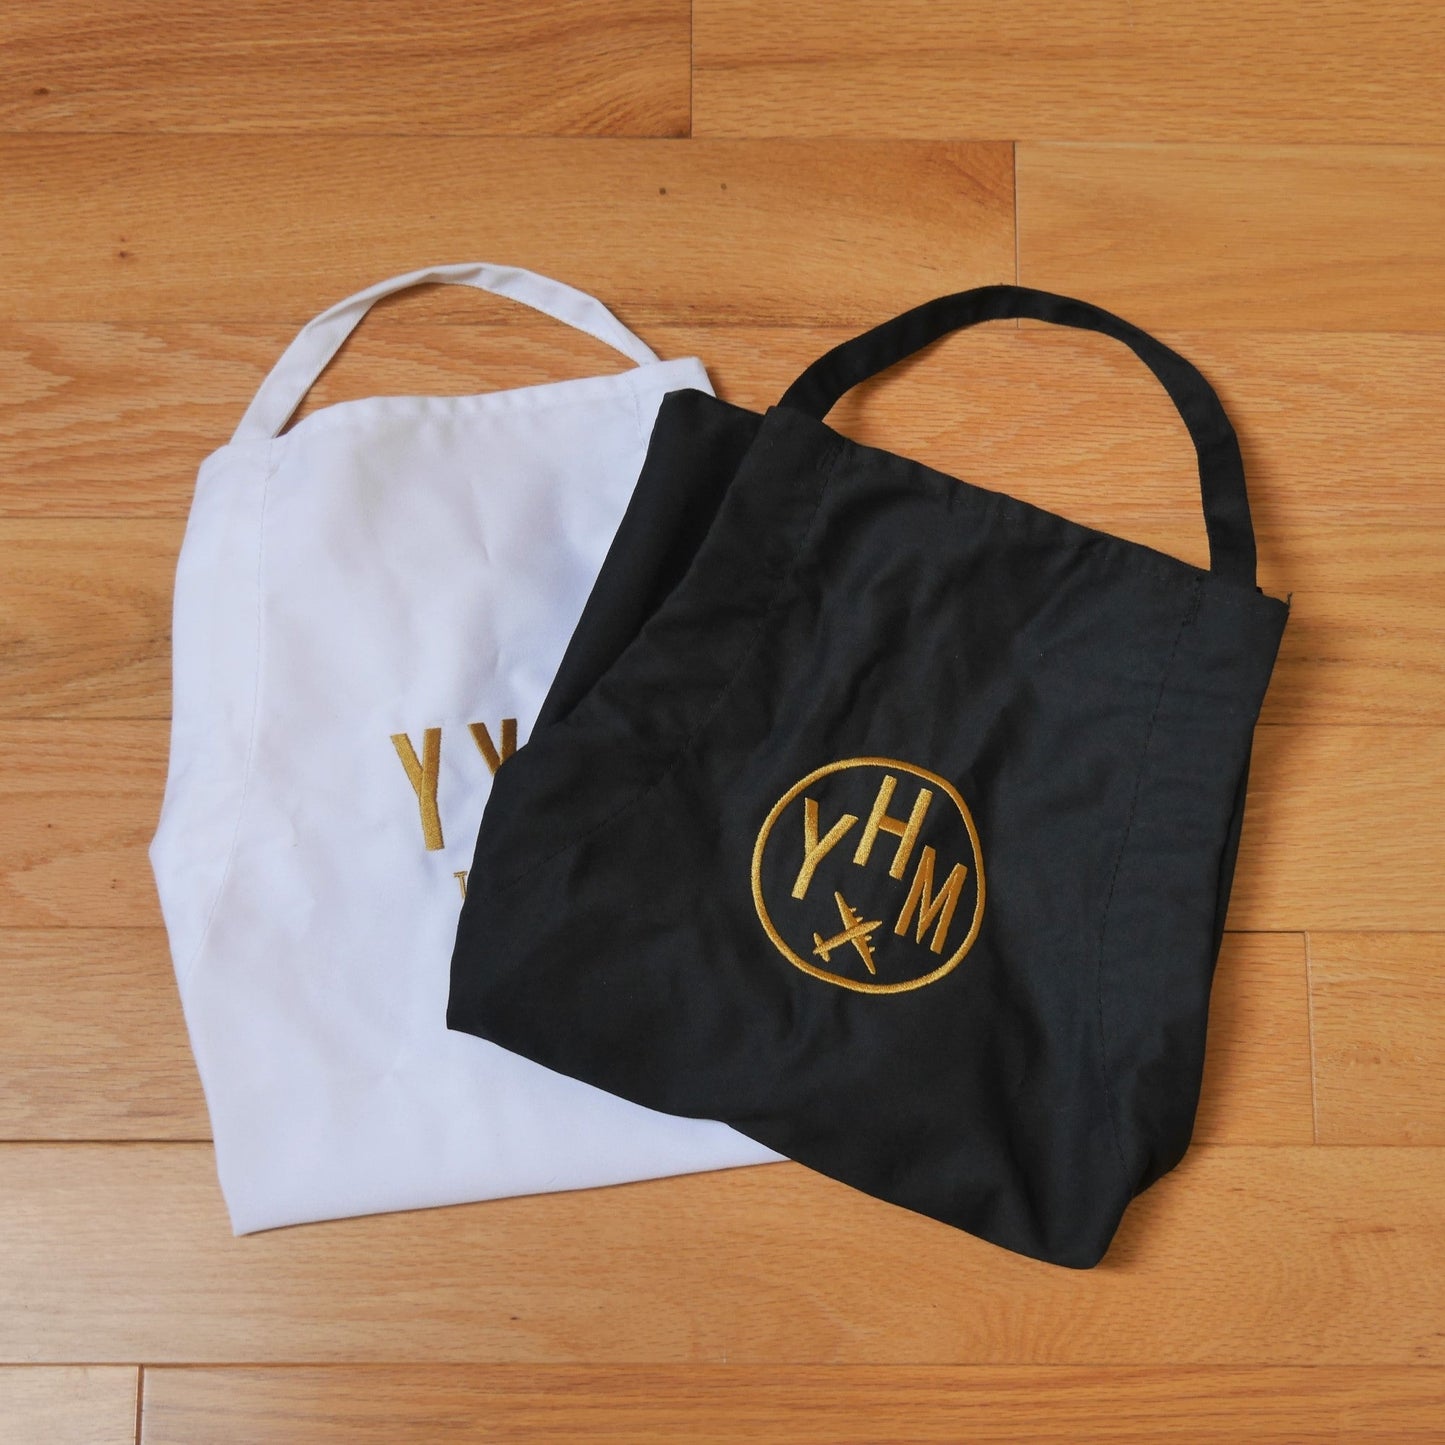 City Embroidered Apron - Old Gold • CLT Charlotte • YHM Designs - Image 14